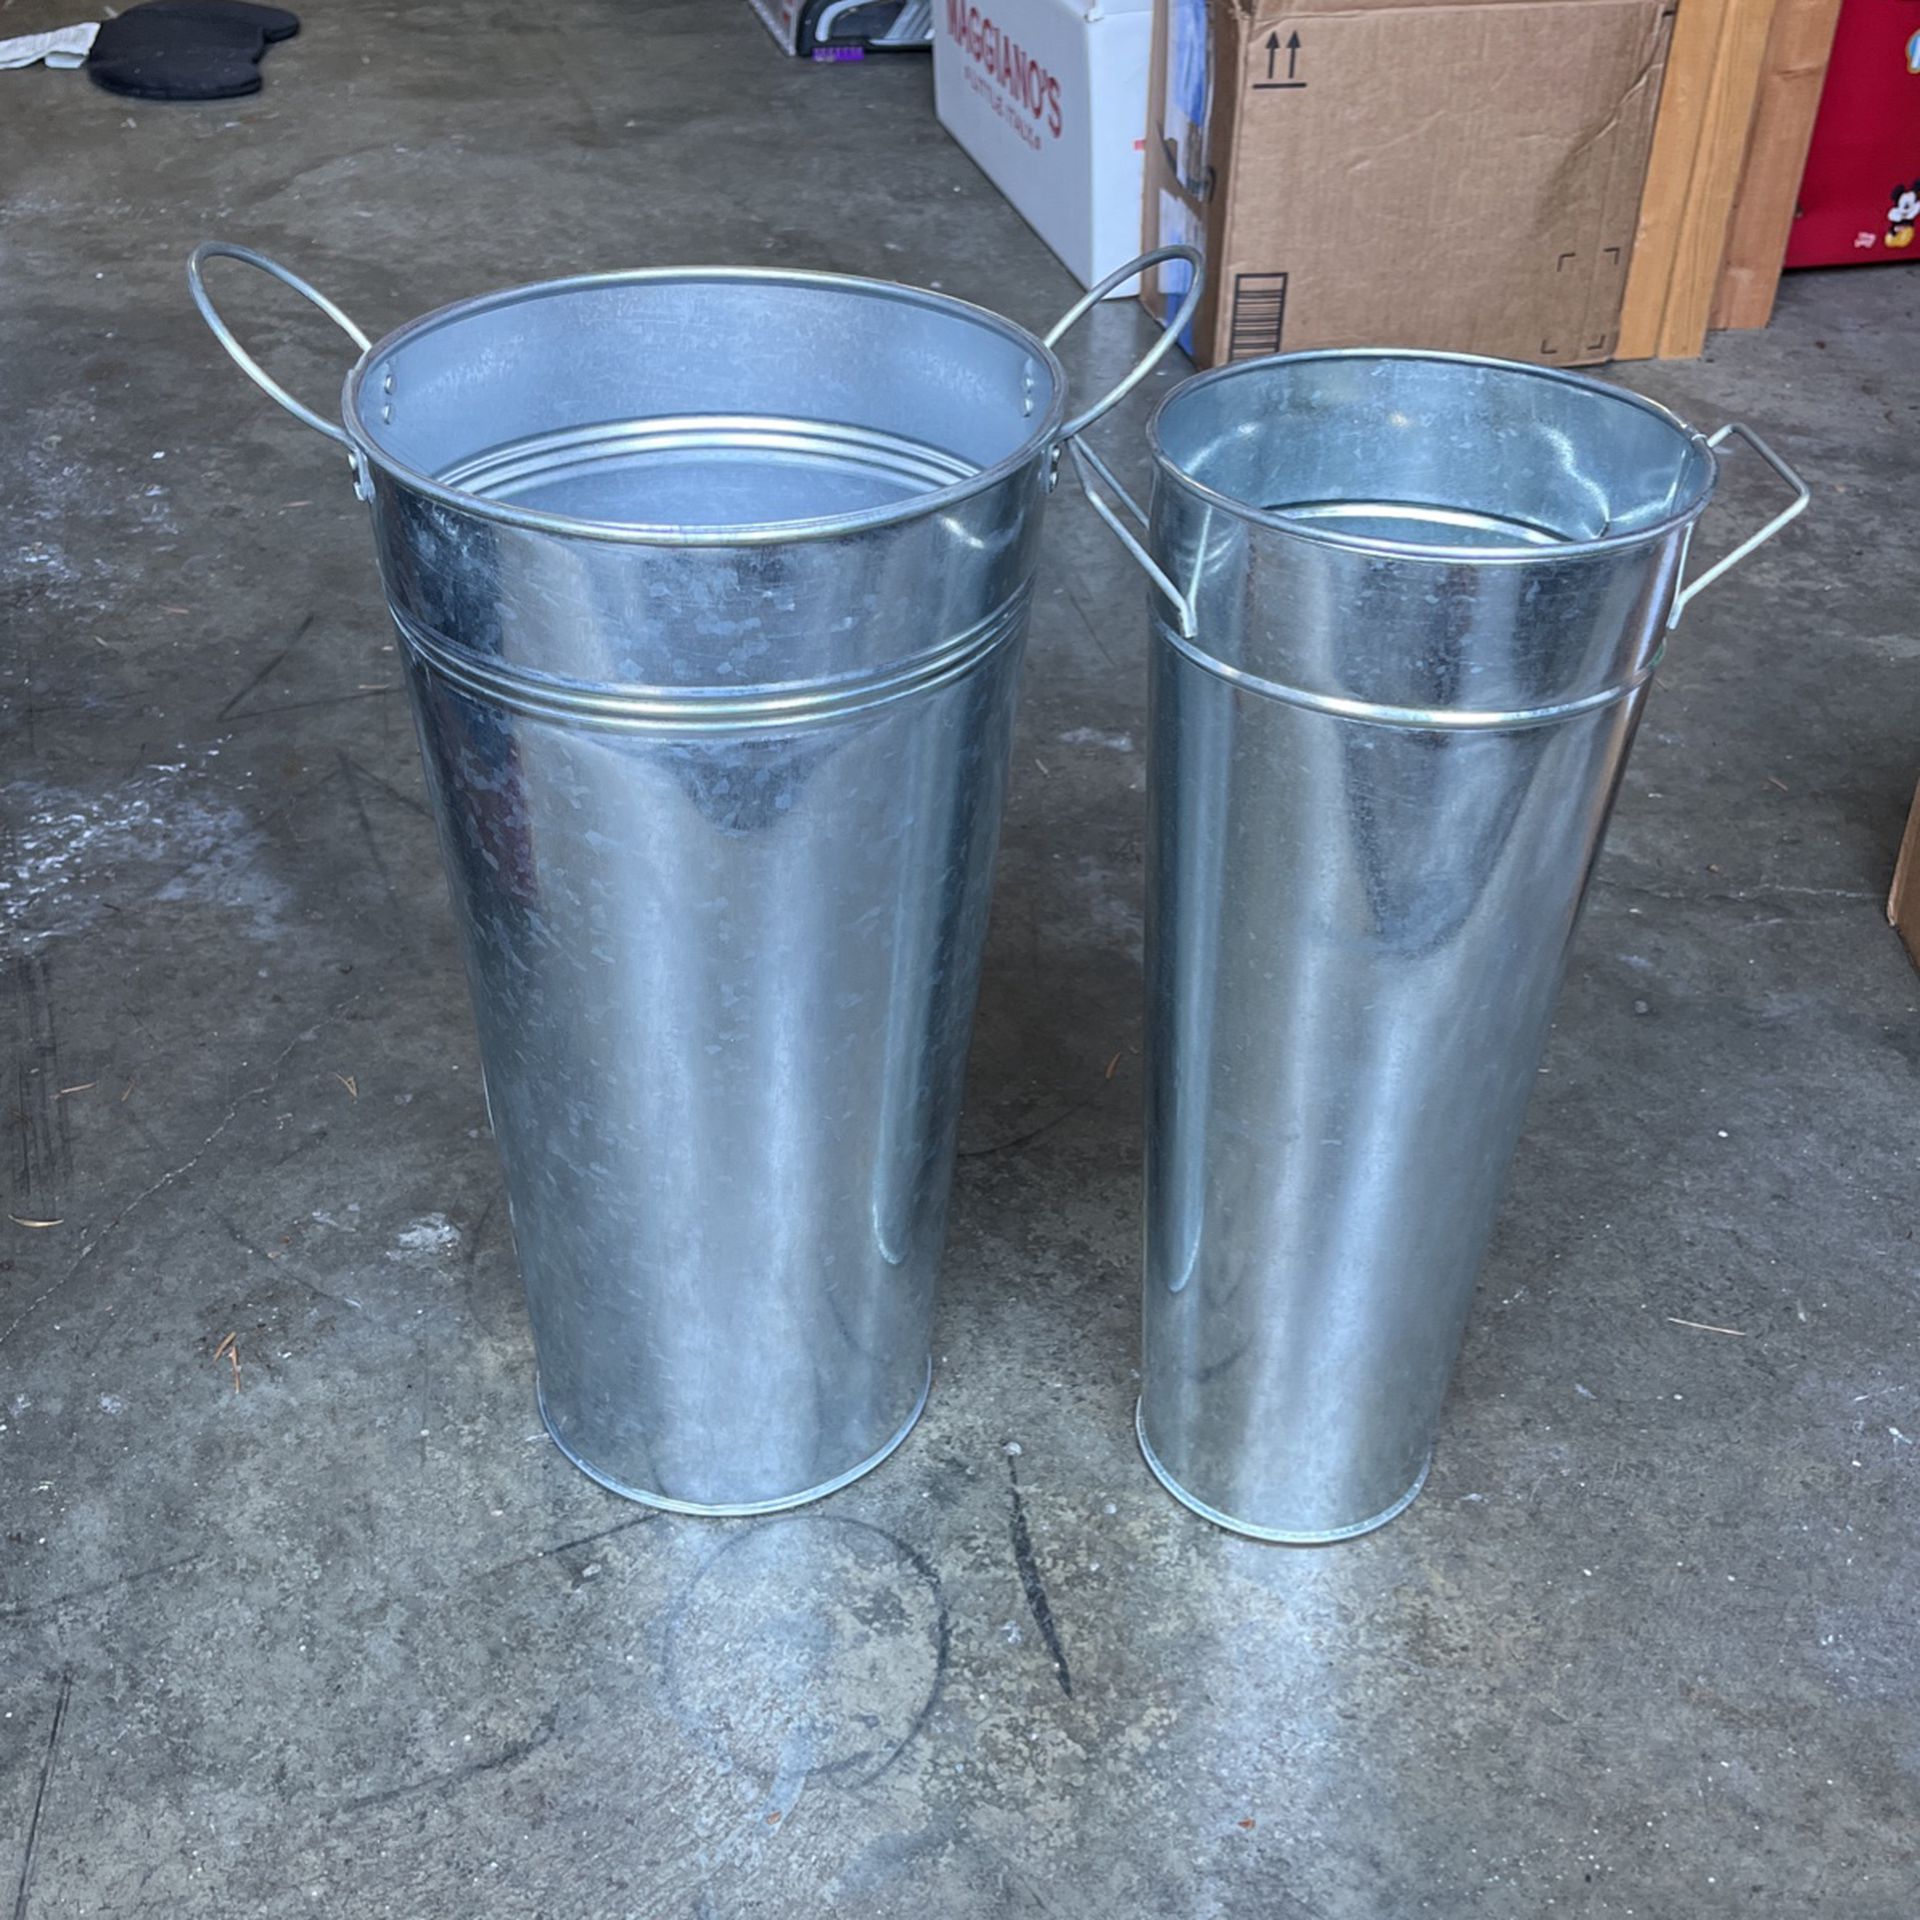 Tall, Silver Metal Canisters For Fire Sparklers